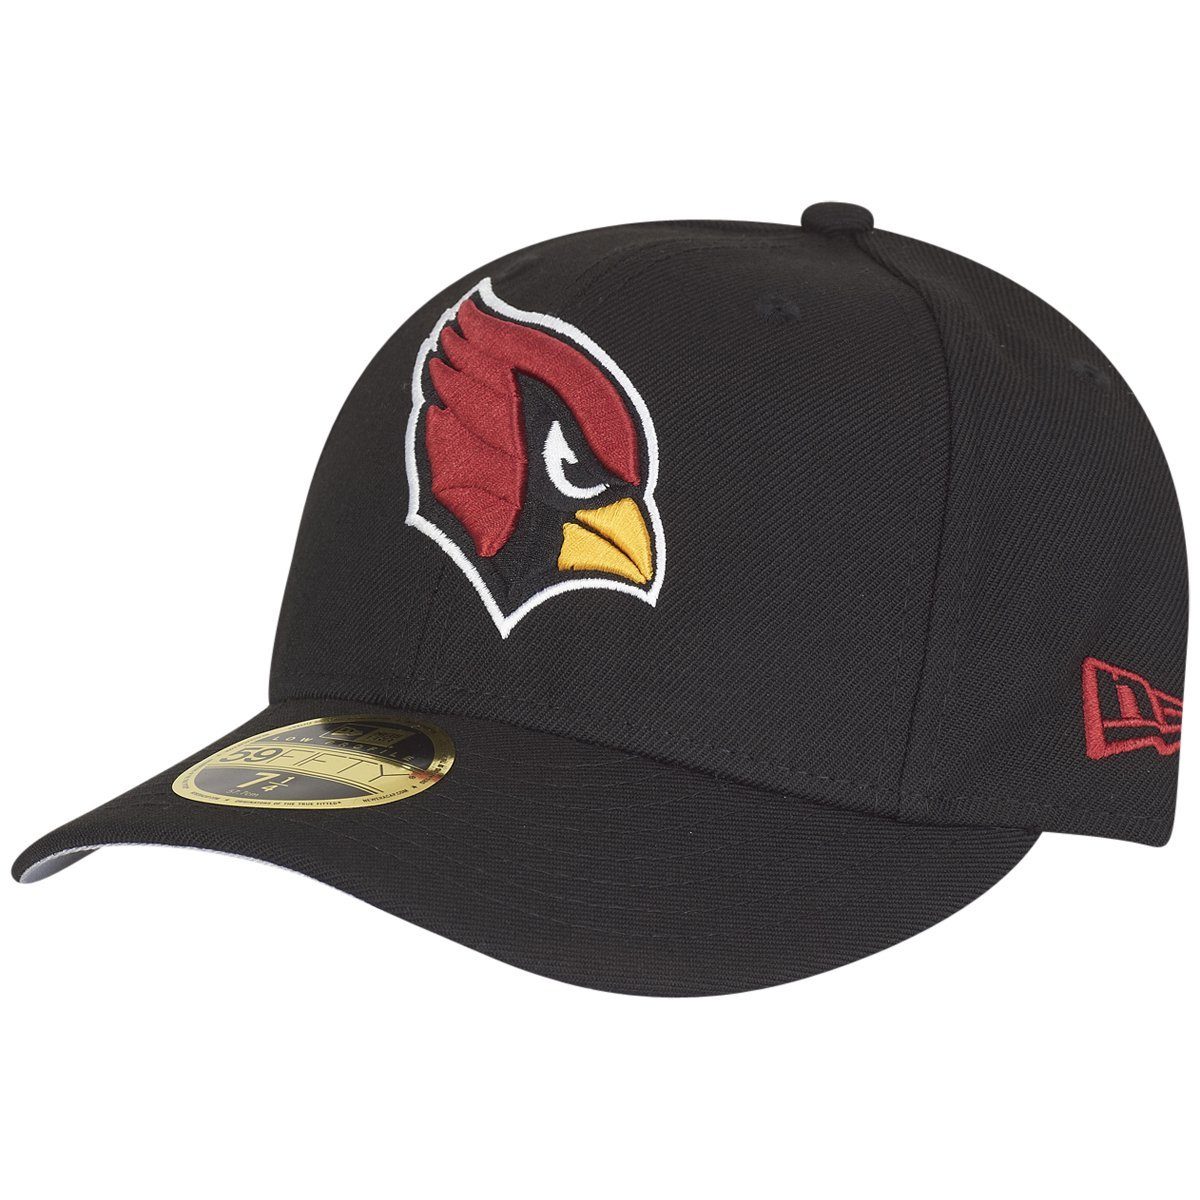 LOW Cap PROFILE Cardinals Era New 59Fifty Fitted Arizona